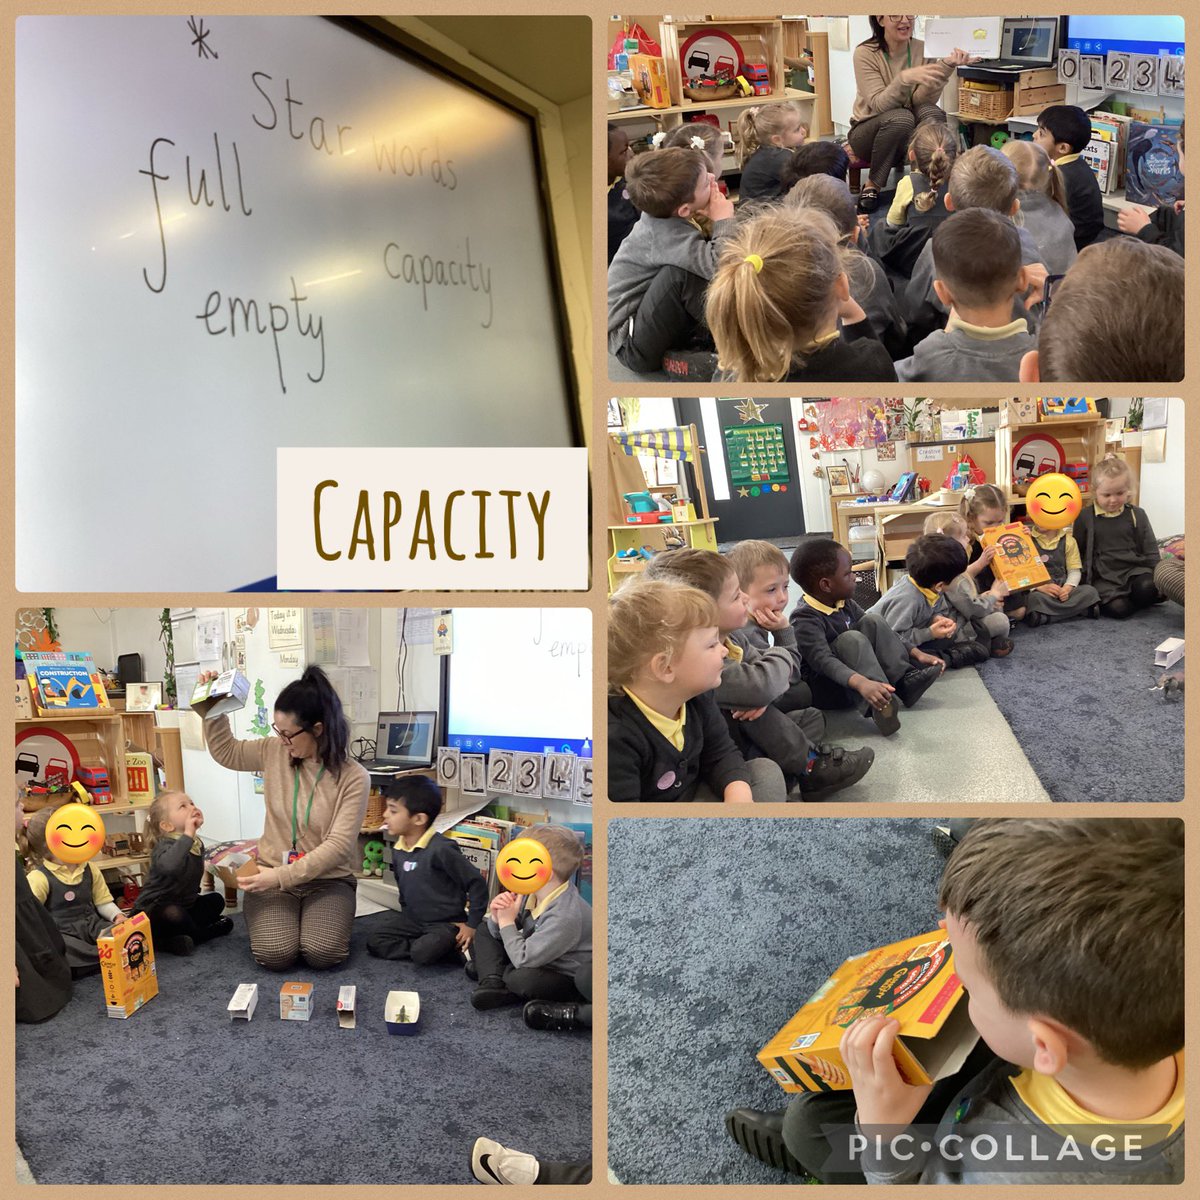 Learning about capacity in Maths today after reading the book Dear Zoo by Rod Campbell. The children were challenged to find boxes that the toy animals would fit inside @mesne_lea #earlymaths #capacityineyfs #full #empty #howmanywillfit #languageofsize #challengecompleted